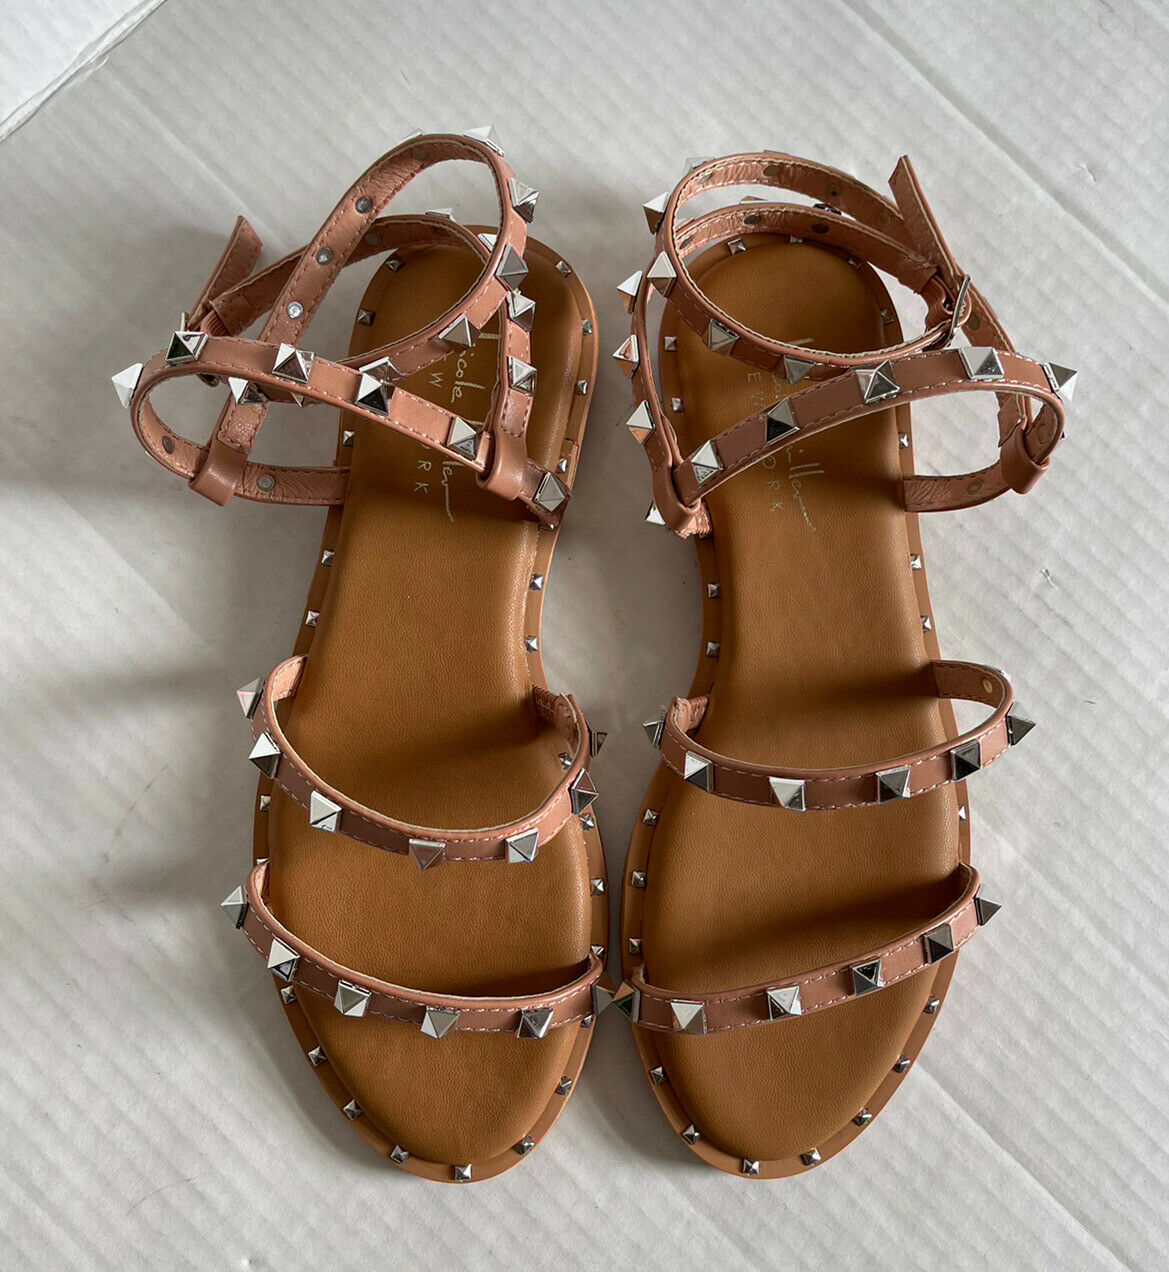 NEW NICOLE MILLER Woman’s Studded Sandals Shoes Beige Pink sz 6.5